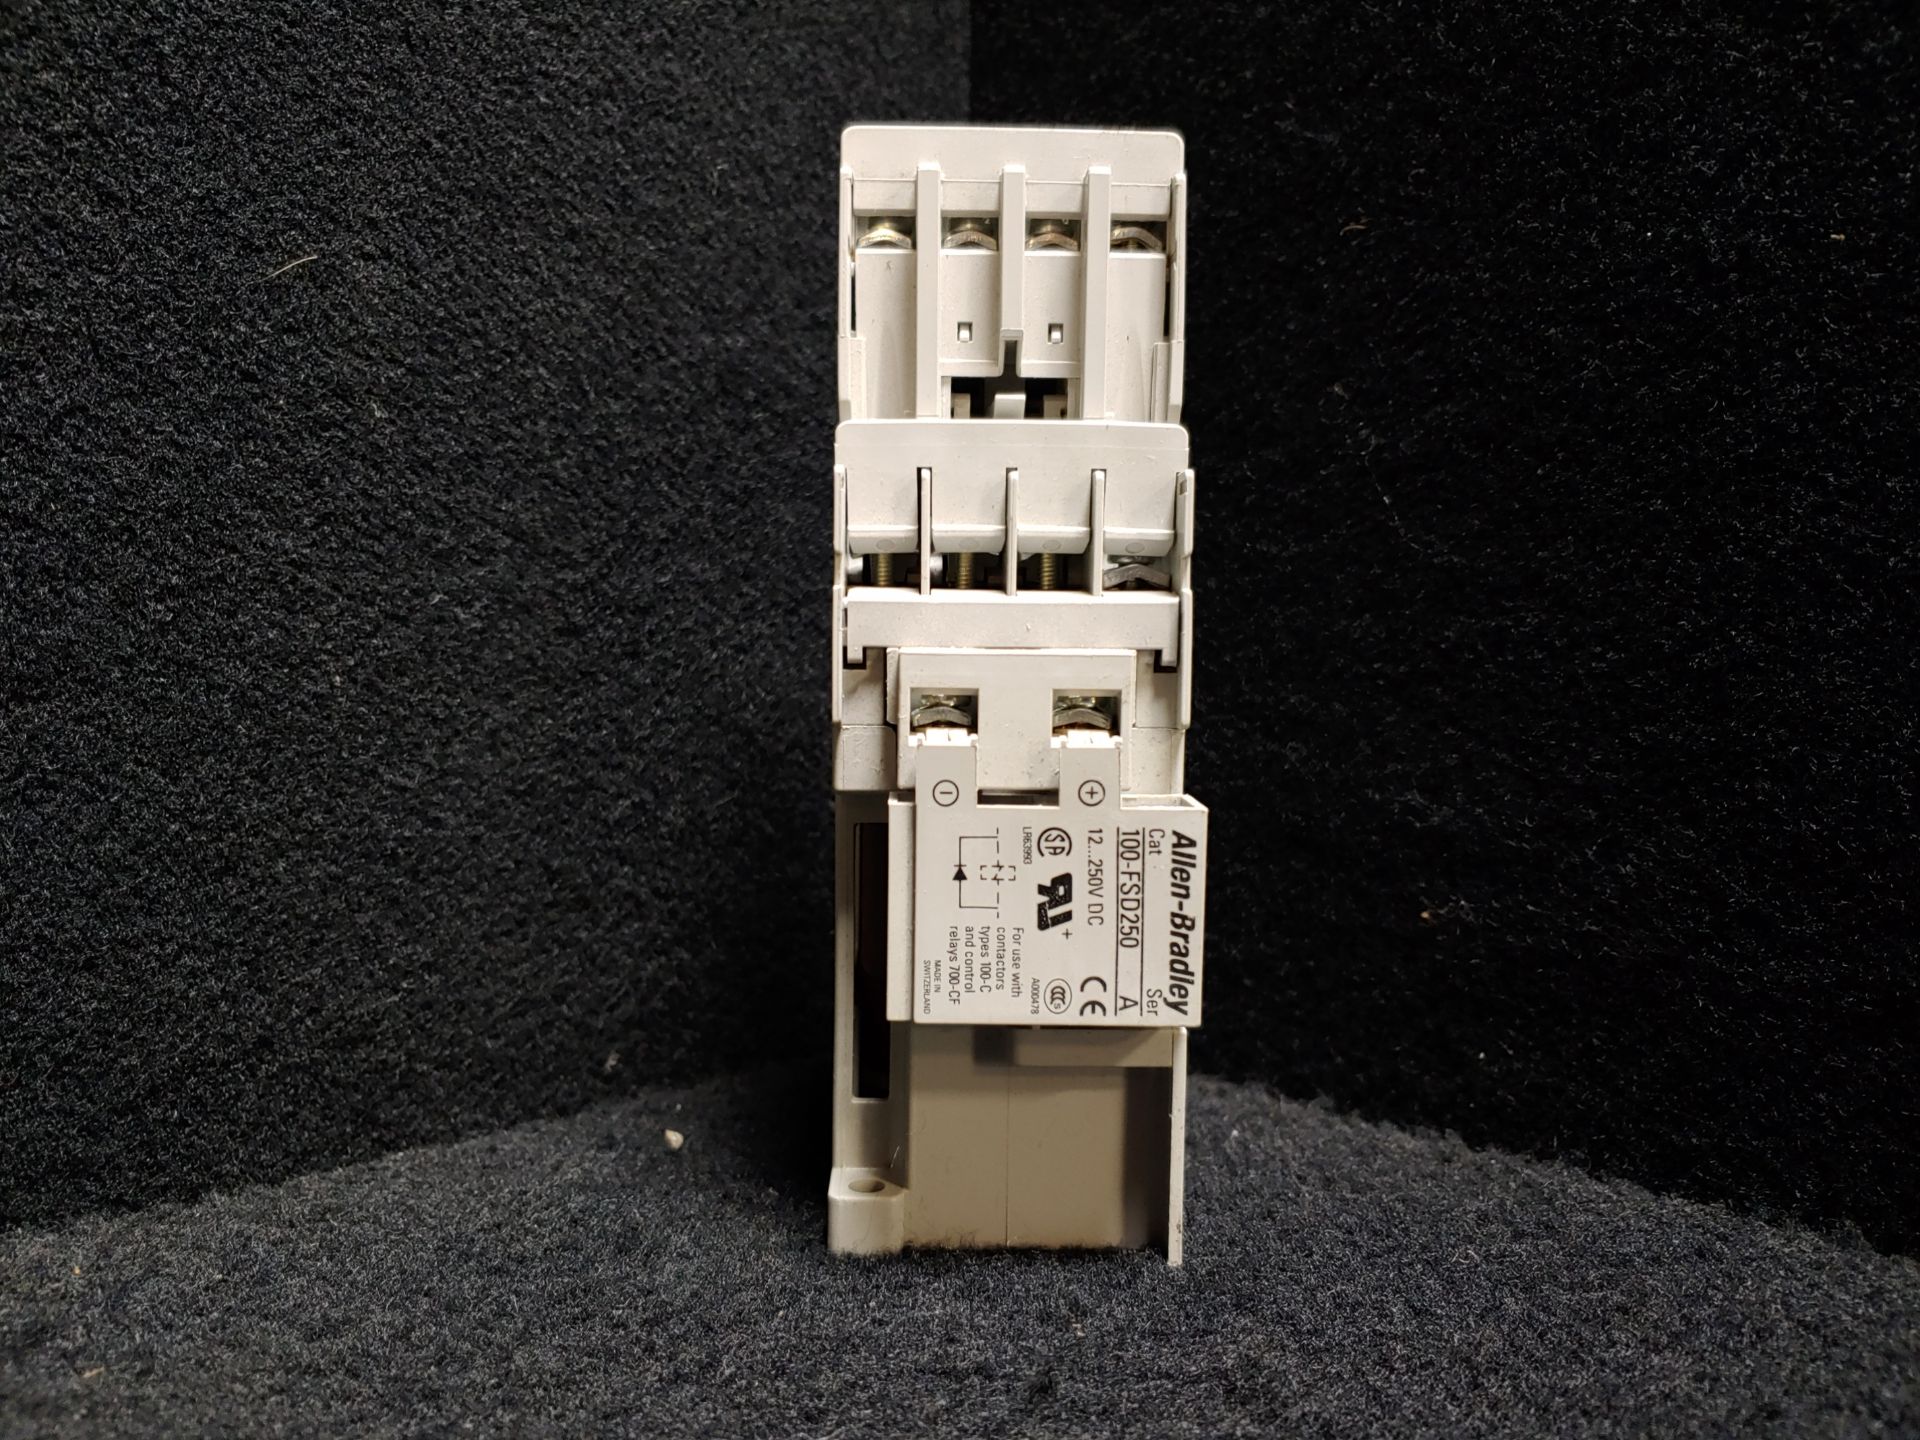 ALLEN BRADLEY 700-CFB220Z*A SAFETY CONTROL RELAY 24VDC - Image 6 of 7